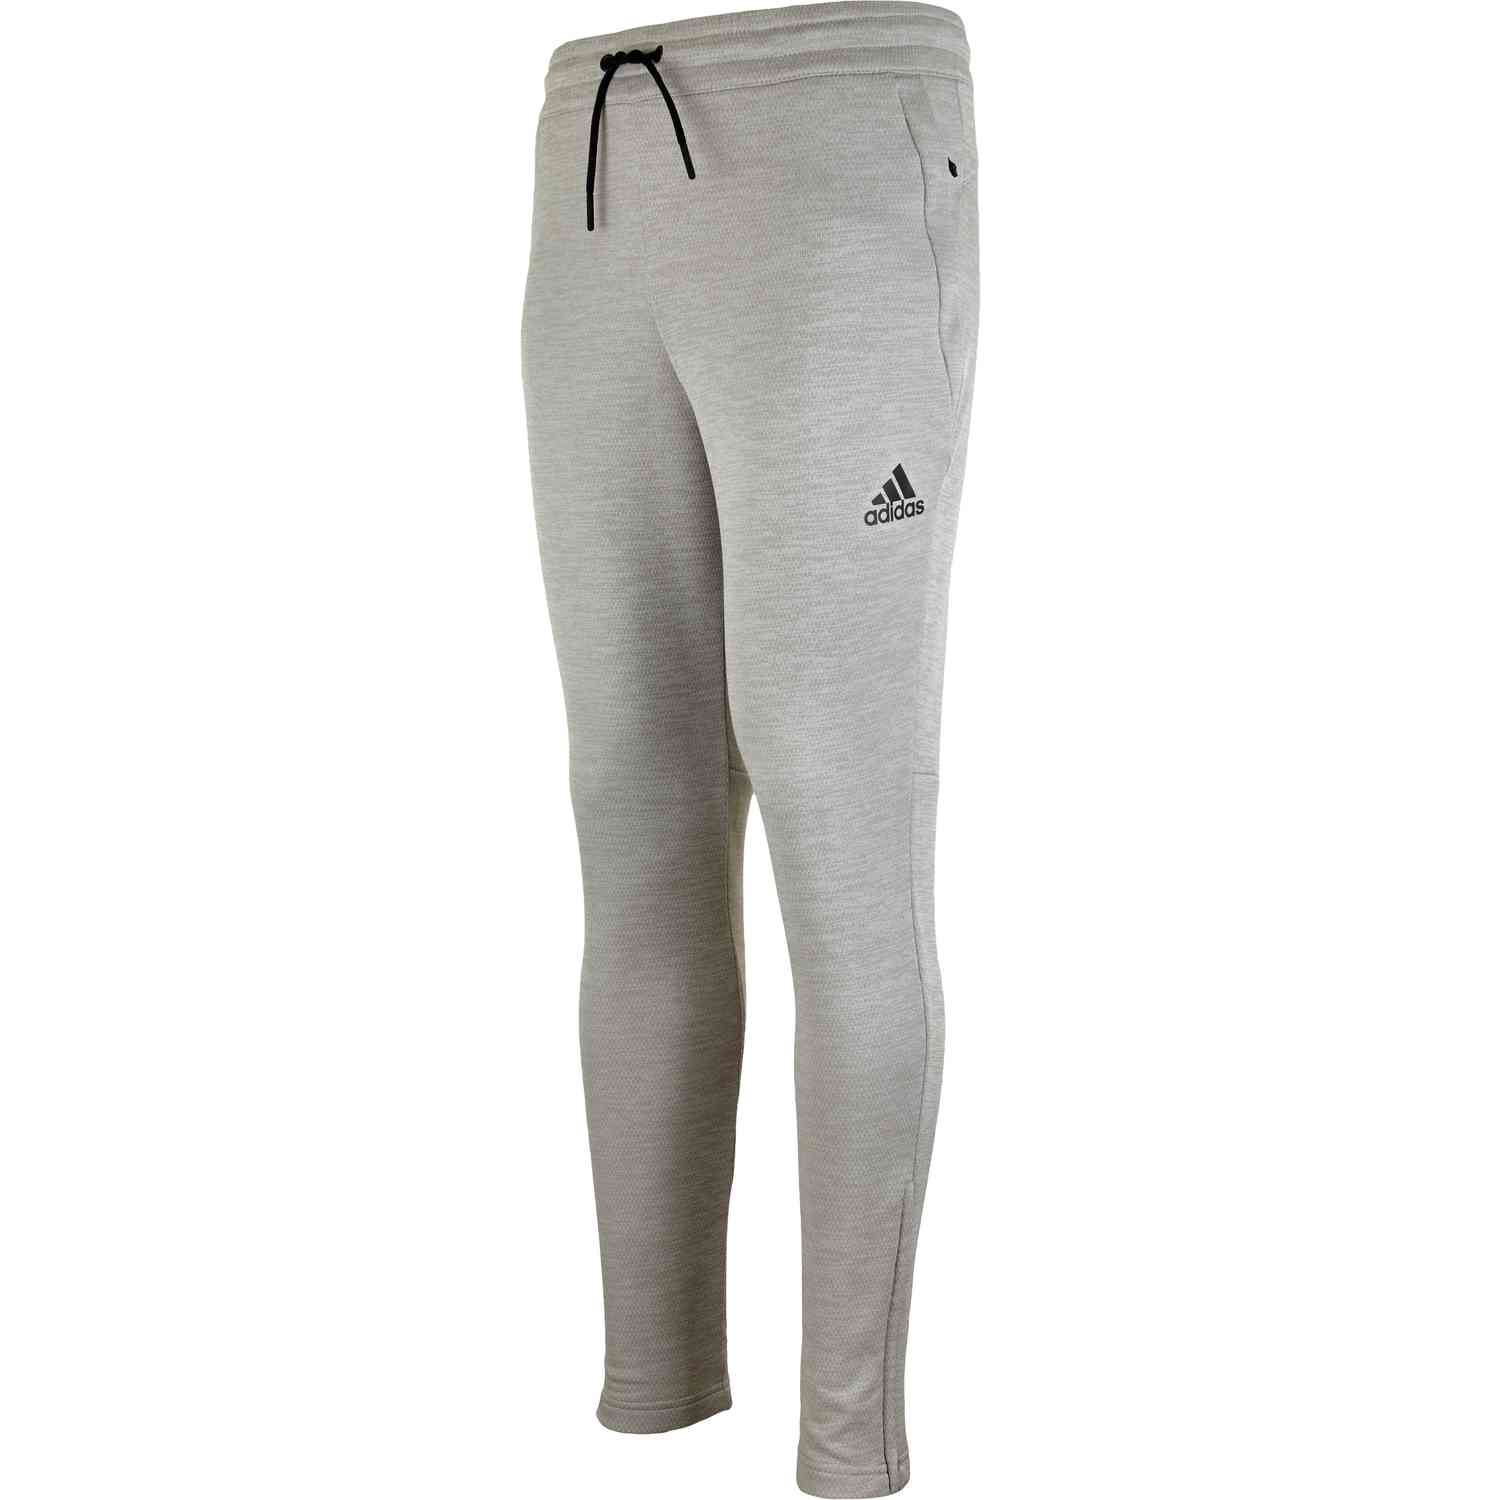 adidas Team Issue Lifestyle Tapered Pants - MGH Solid Grey - Soccer Master